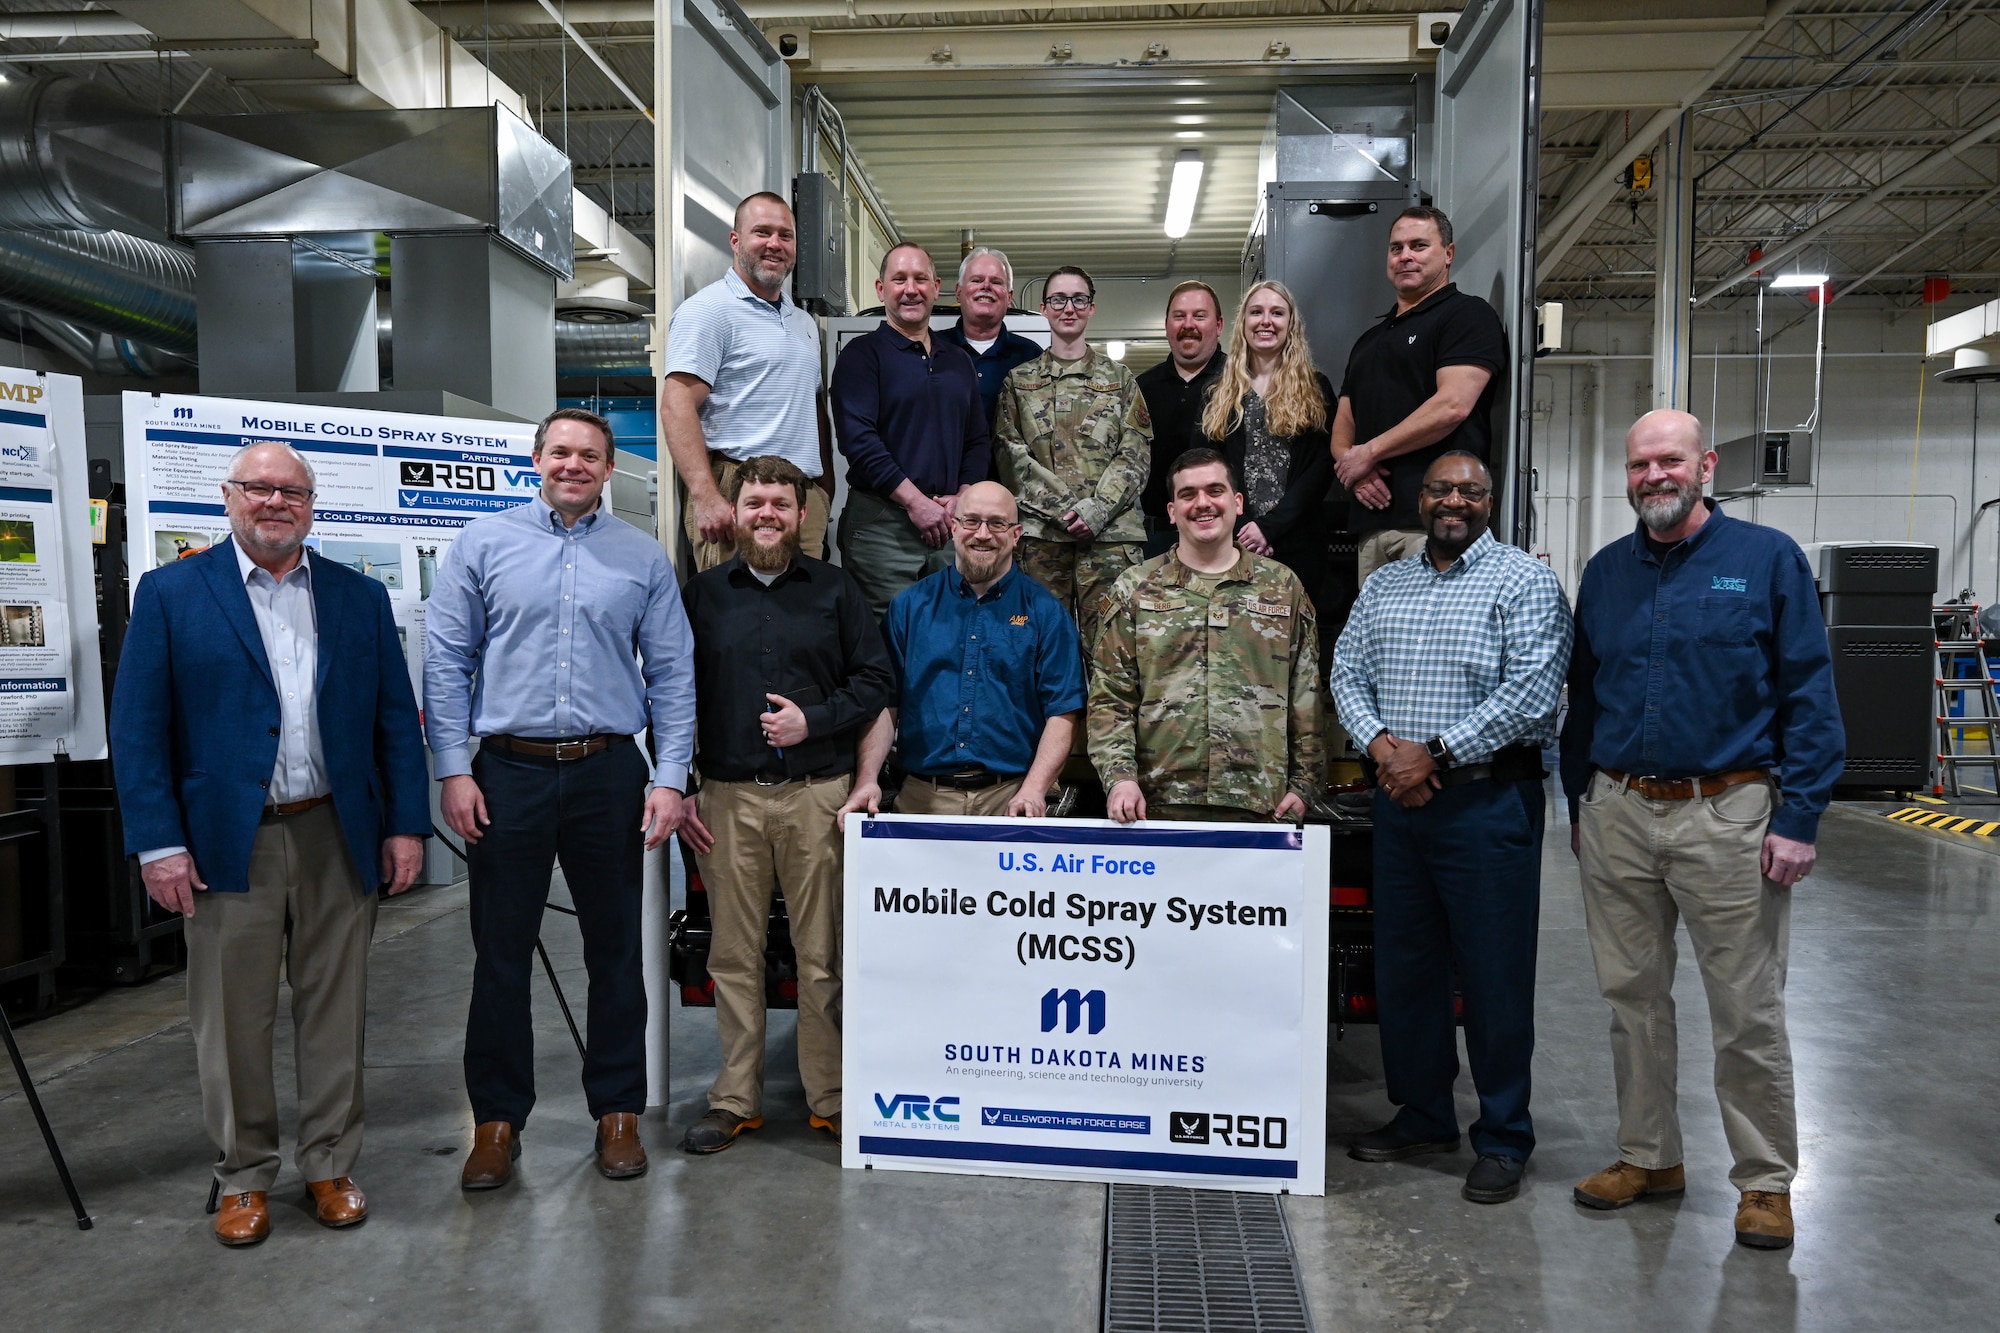 28th Maintenance Group’s Additive Manufacturing Flight accelerates mission readiness with Mobile Cold Spray System